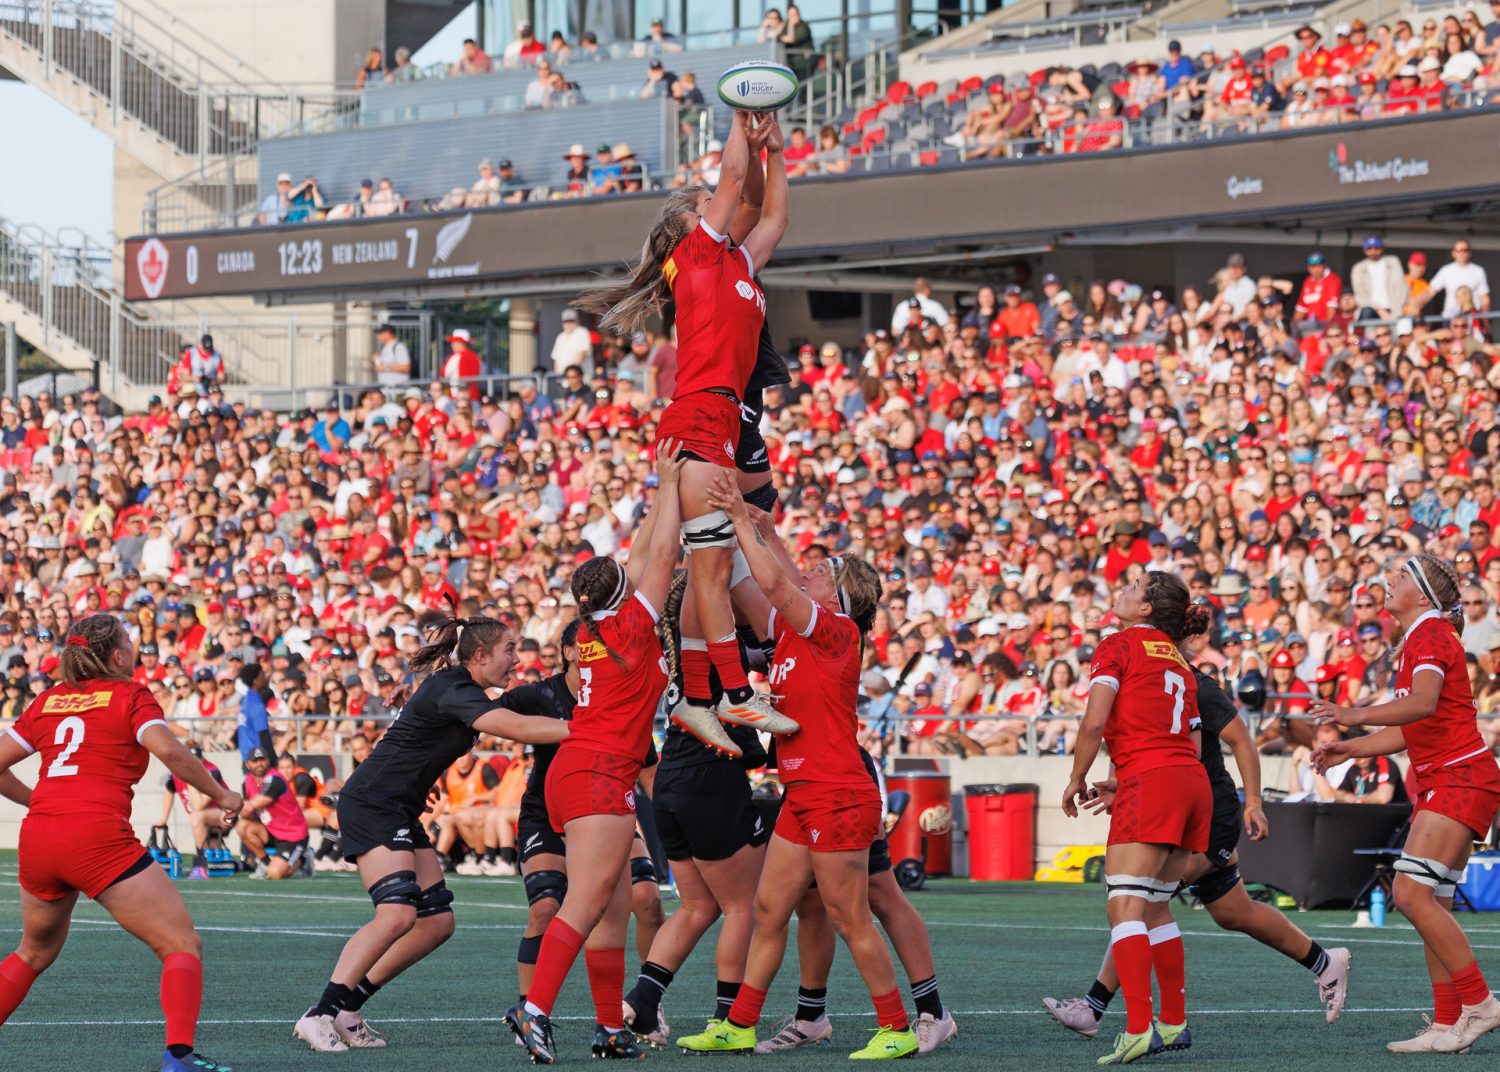 The Canadian Women's National Rugby team competes against the New Zealand Women's National Rugby team. Photo: Ottawa Tourism